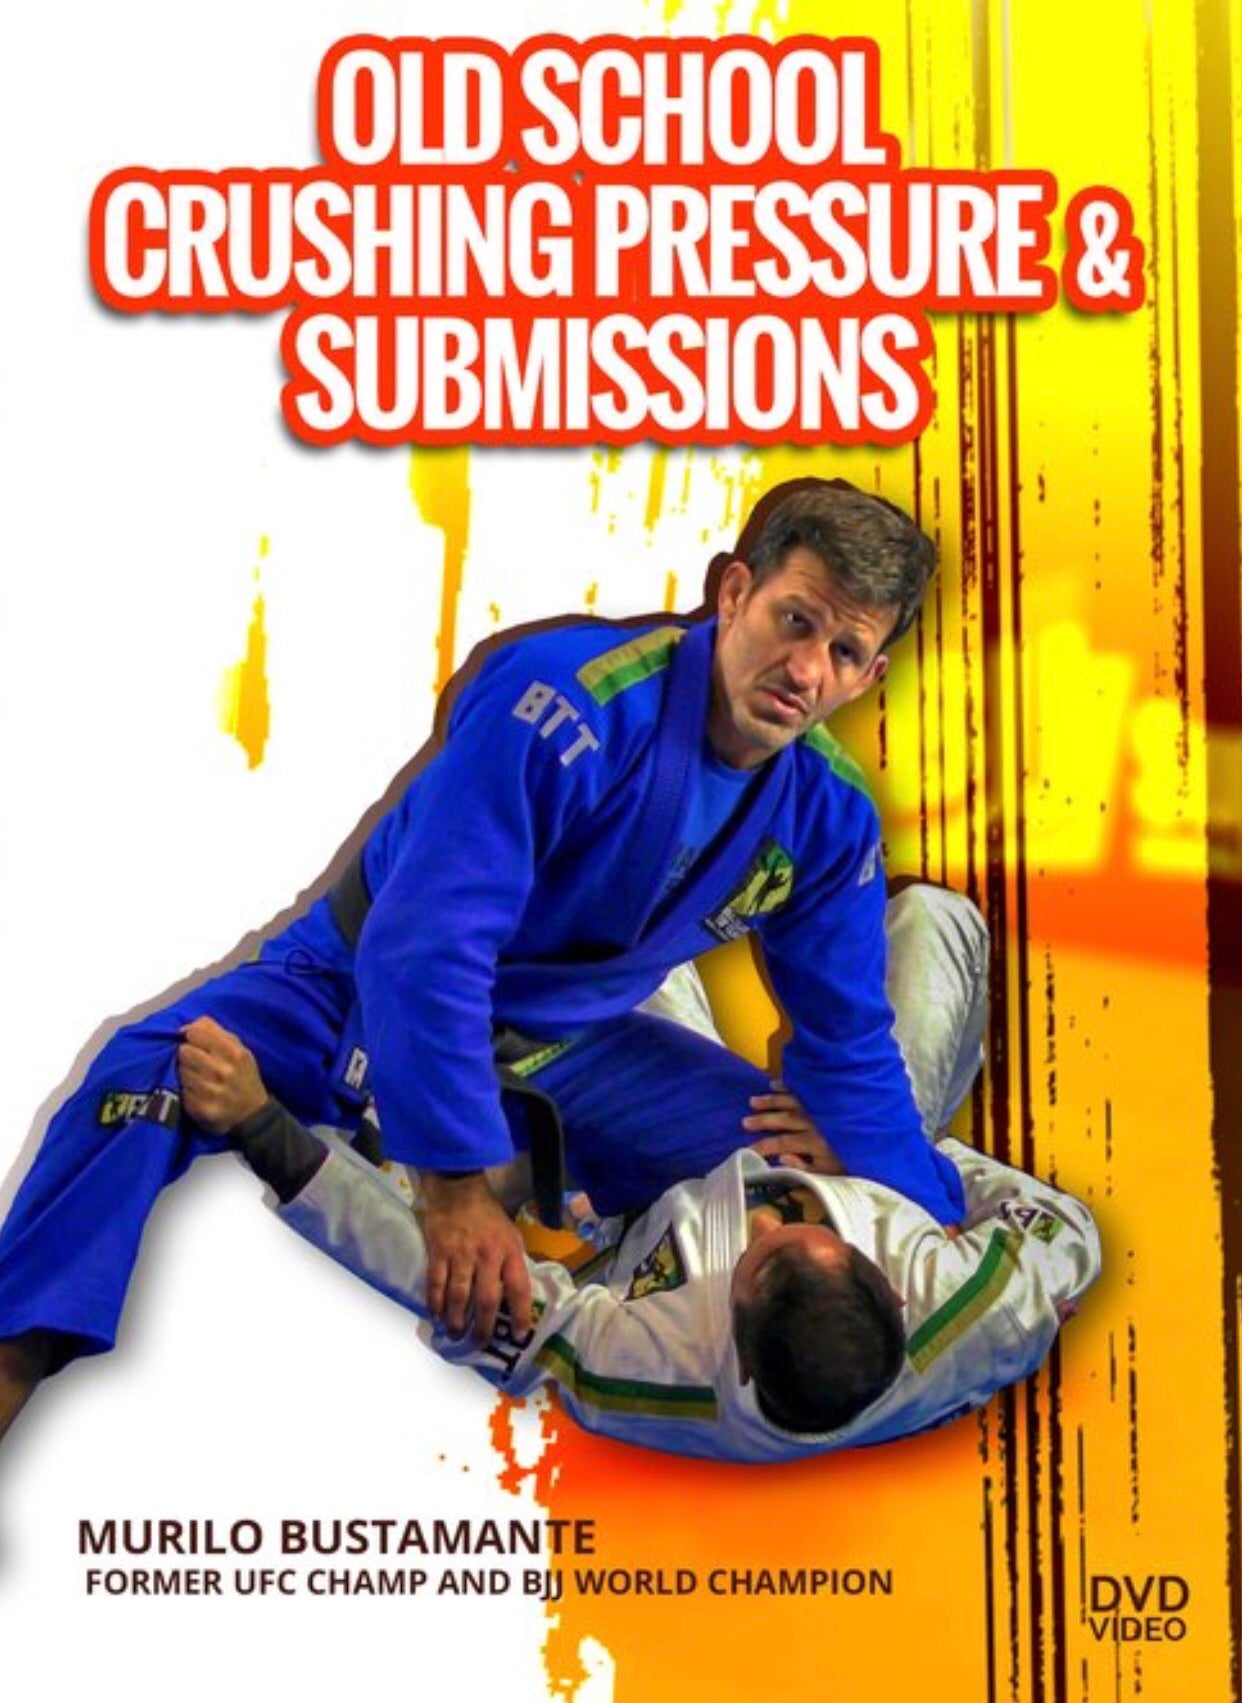 Old School Crushing Pressure & Submissions 2 DVD Set by Murilo Bustamonte - Budovideos Inc